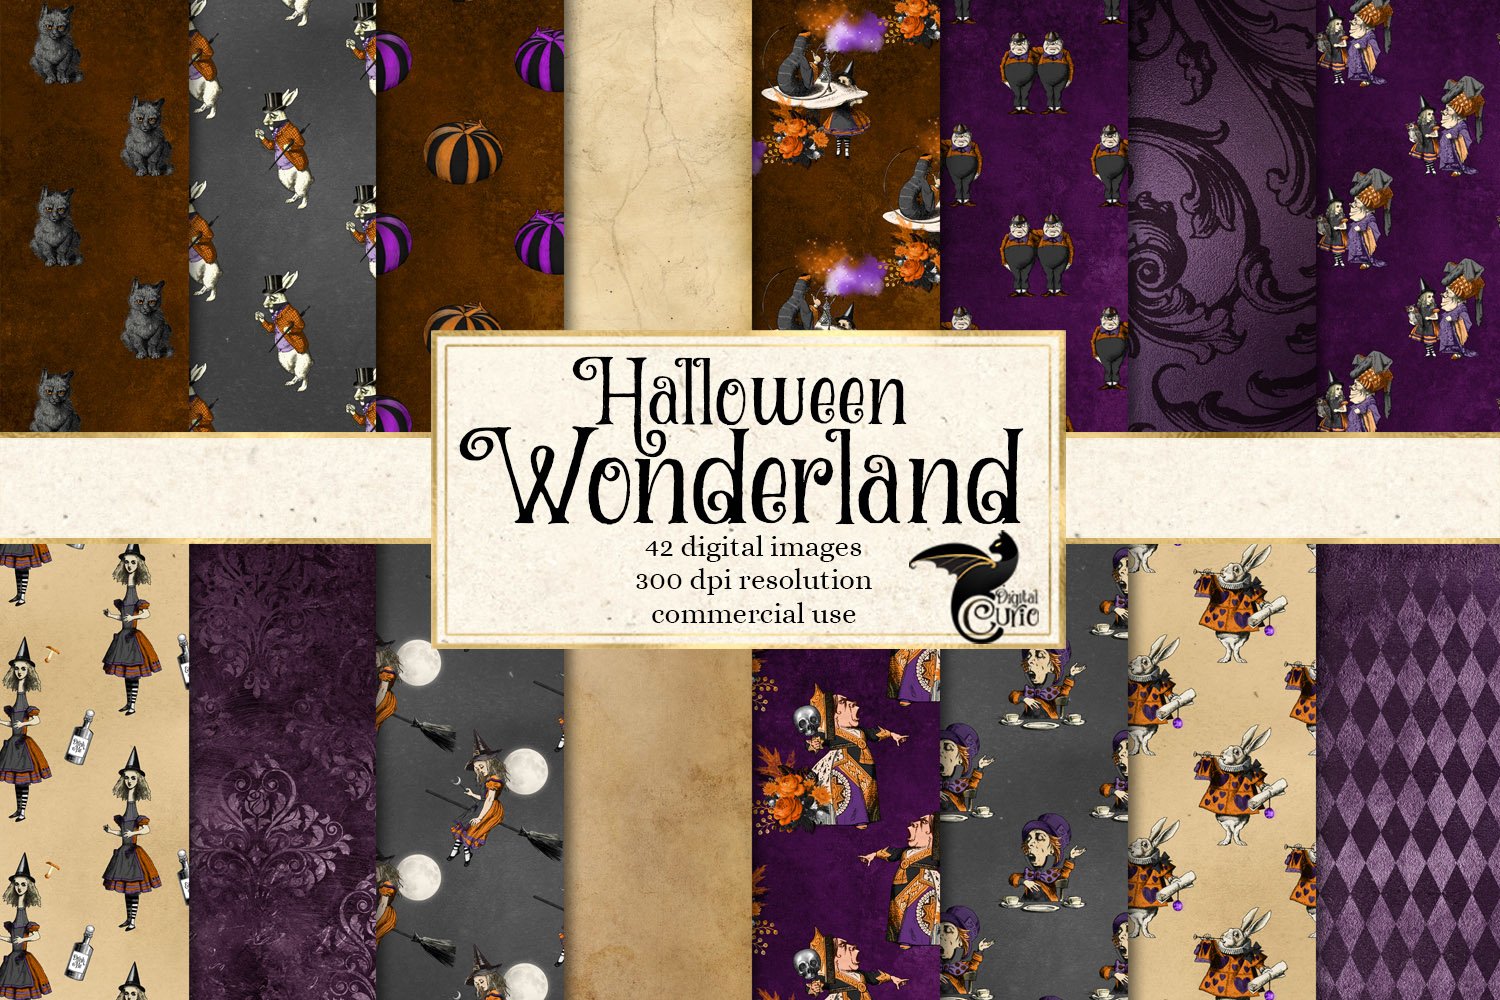 The name is beautiful with different textures on the theme of Wonderland.